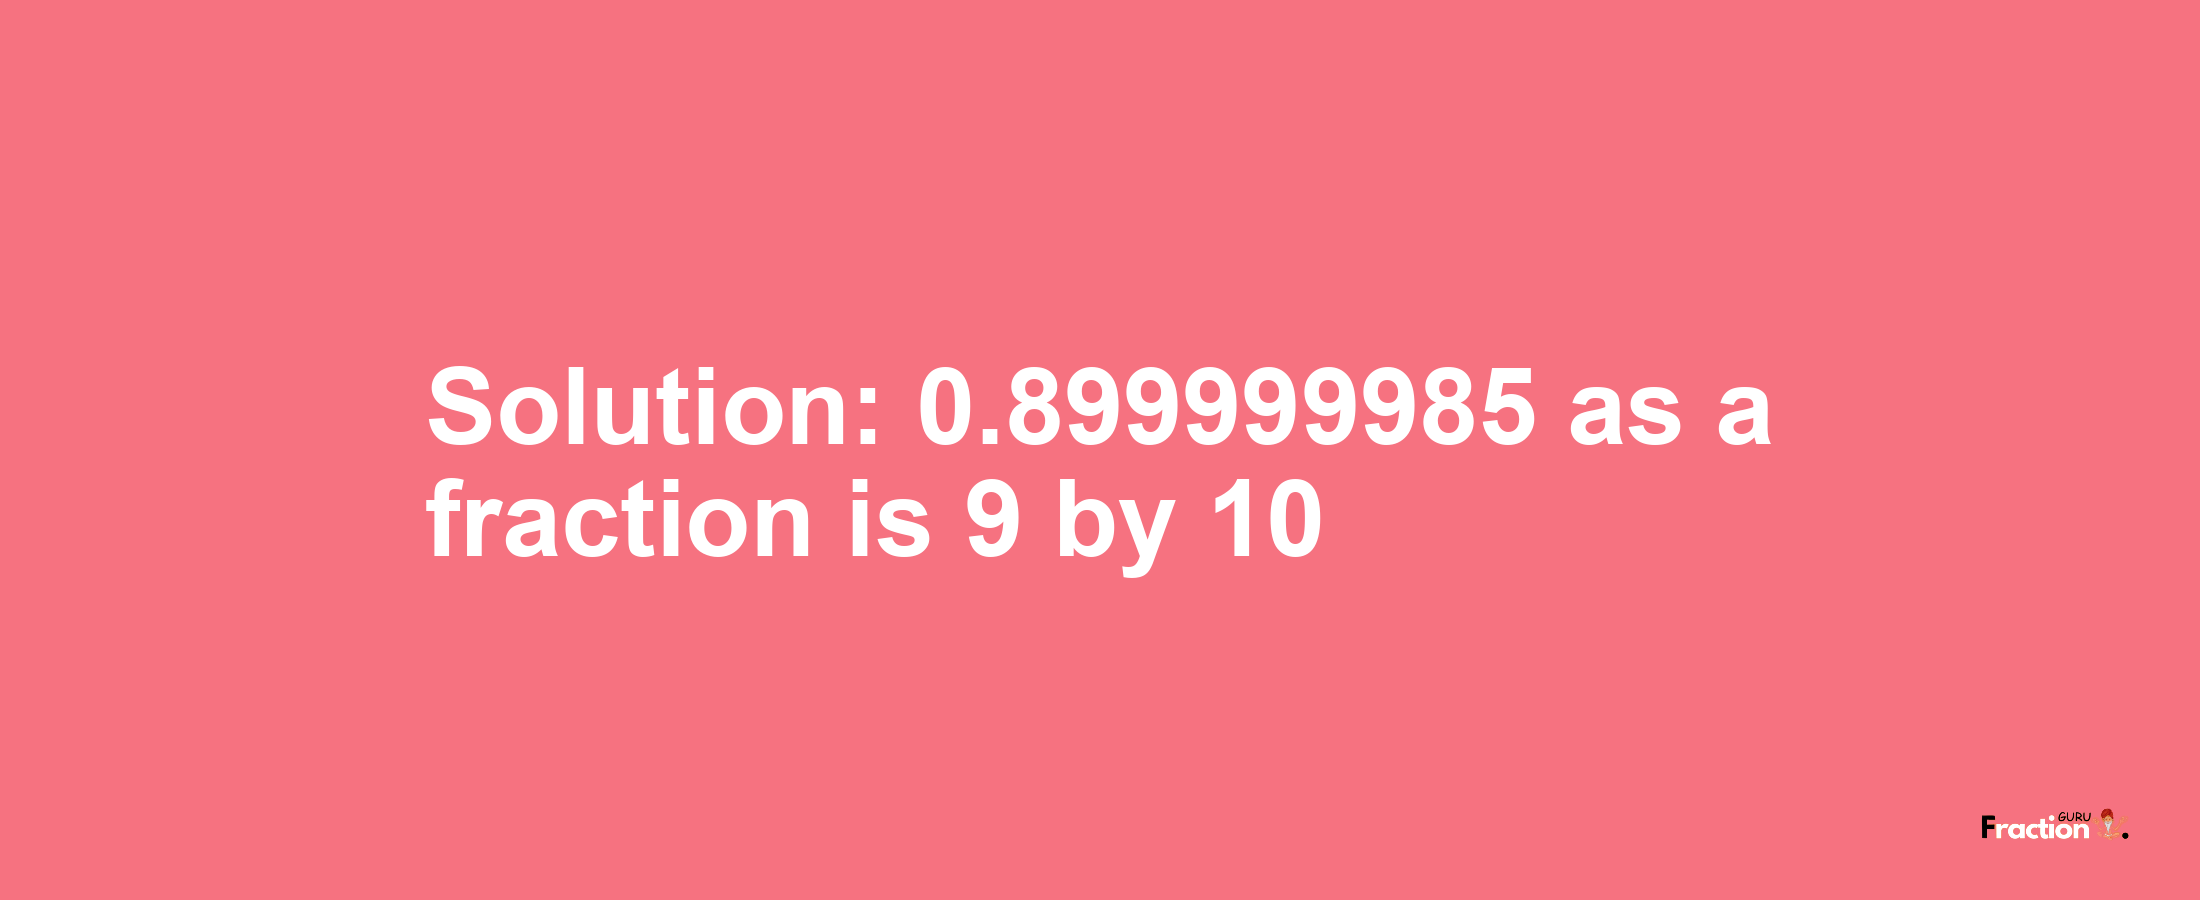 Solution:0.899999985 as a fraction is 9/10